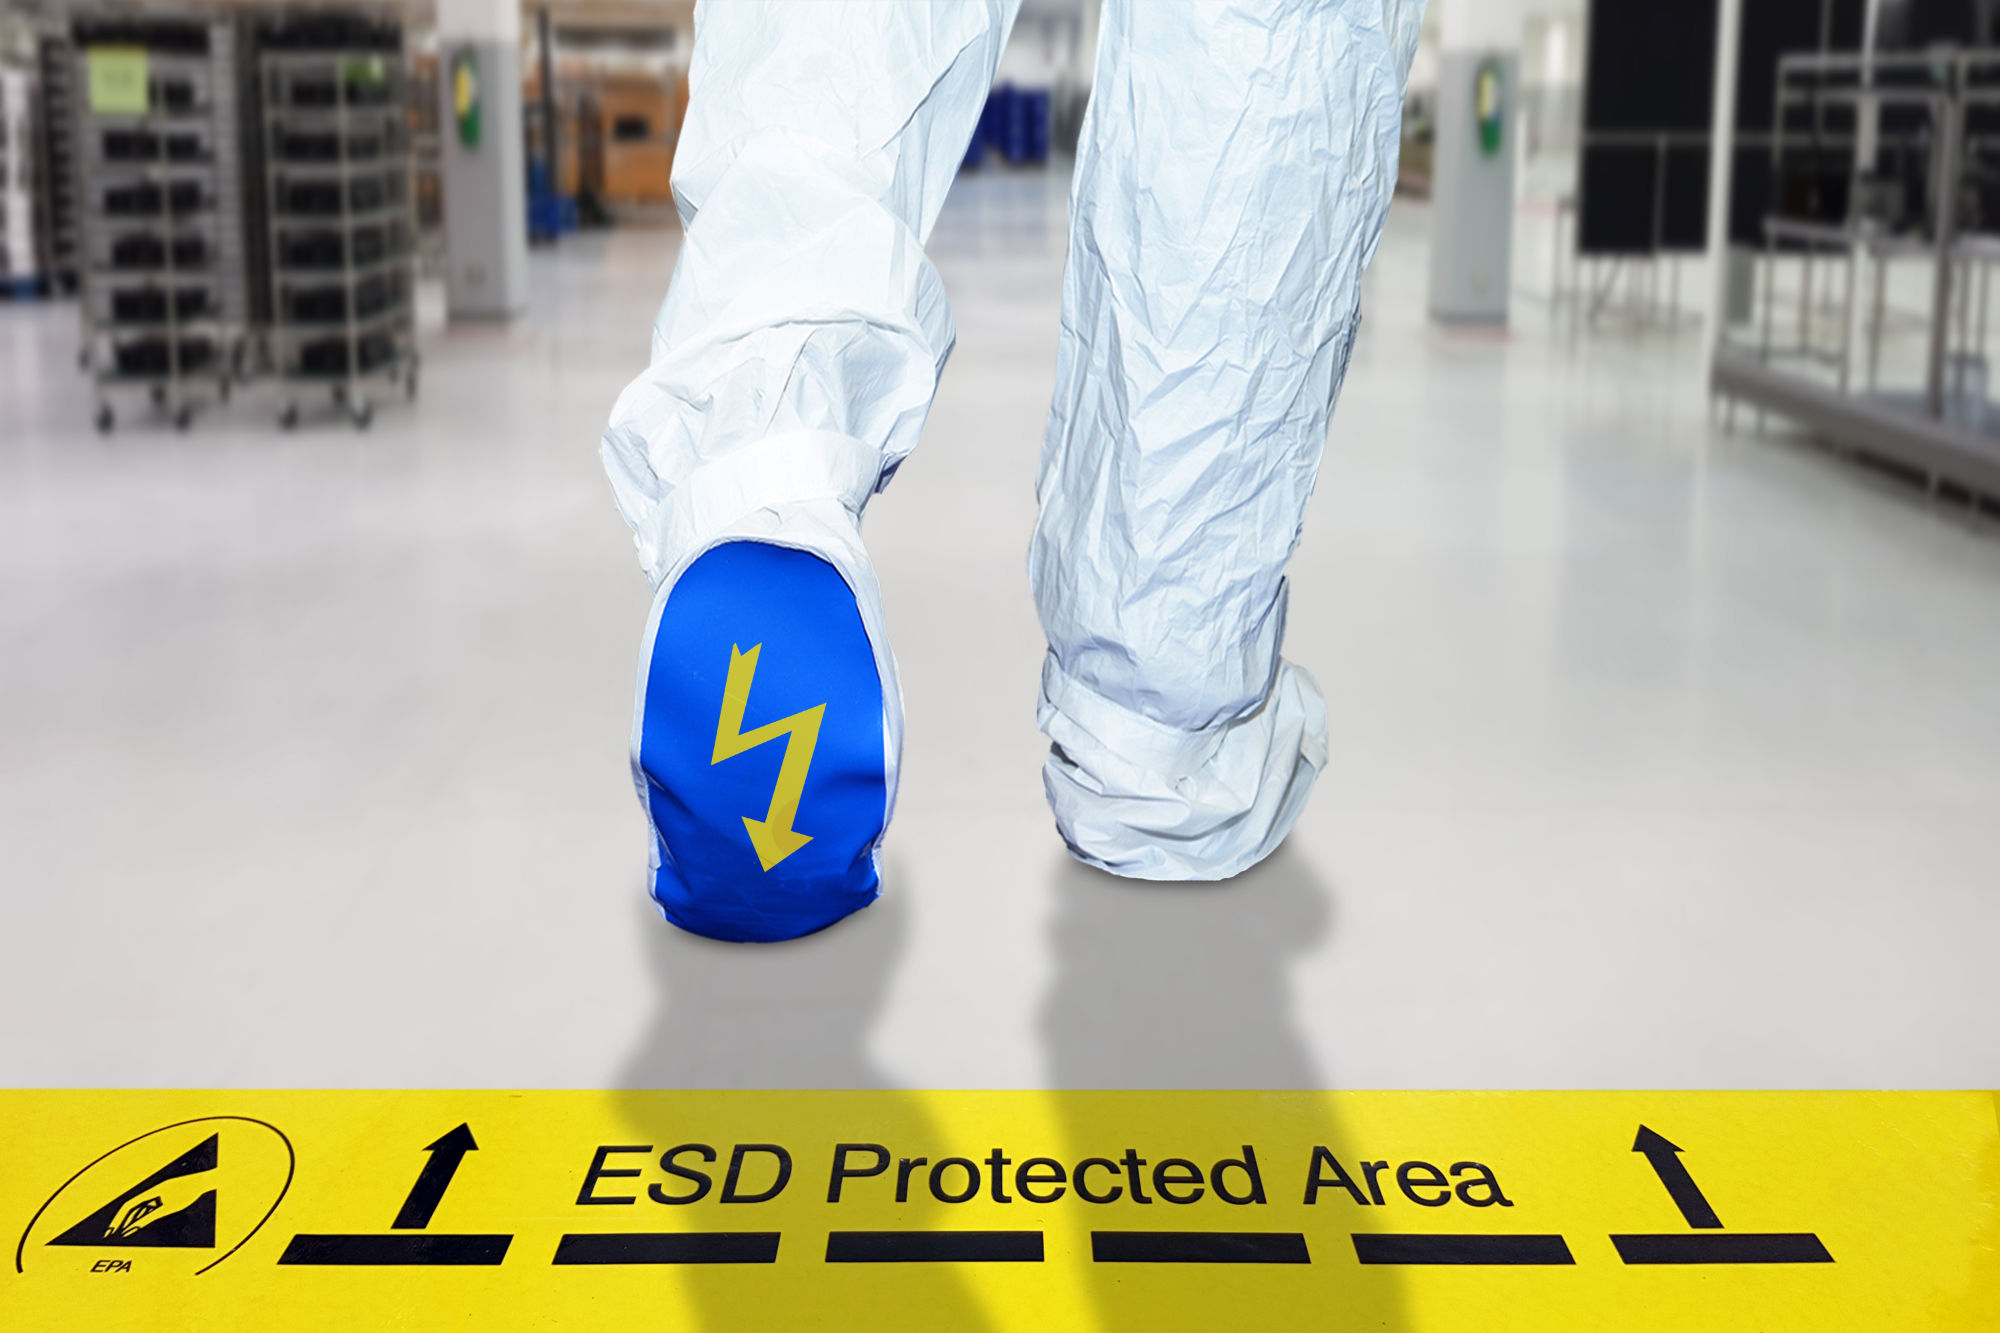 Images of man walking over yellow floor sign with ESD Protected Area on it.